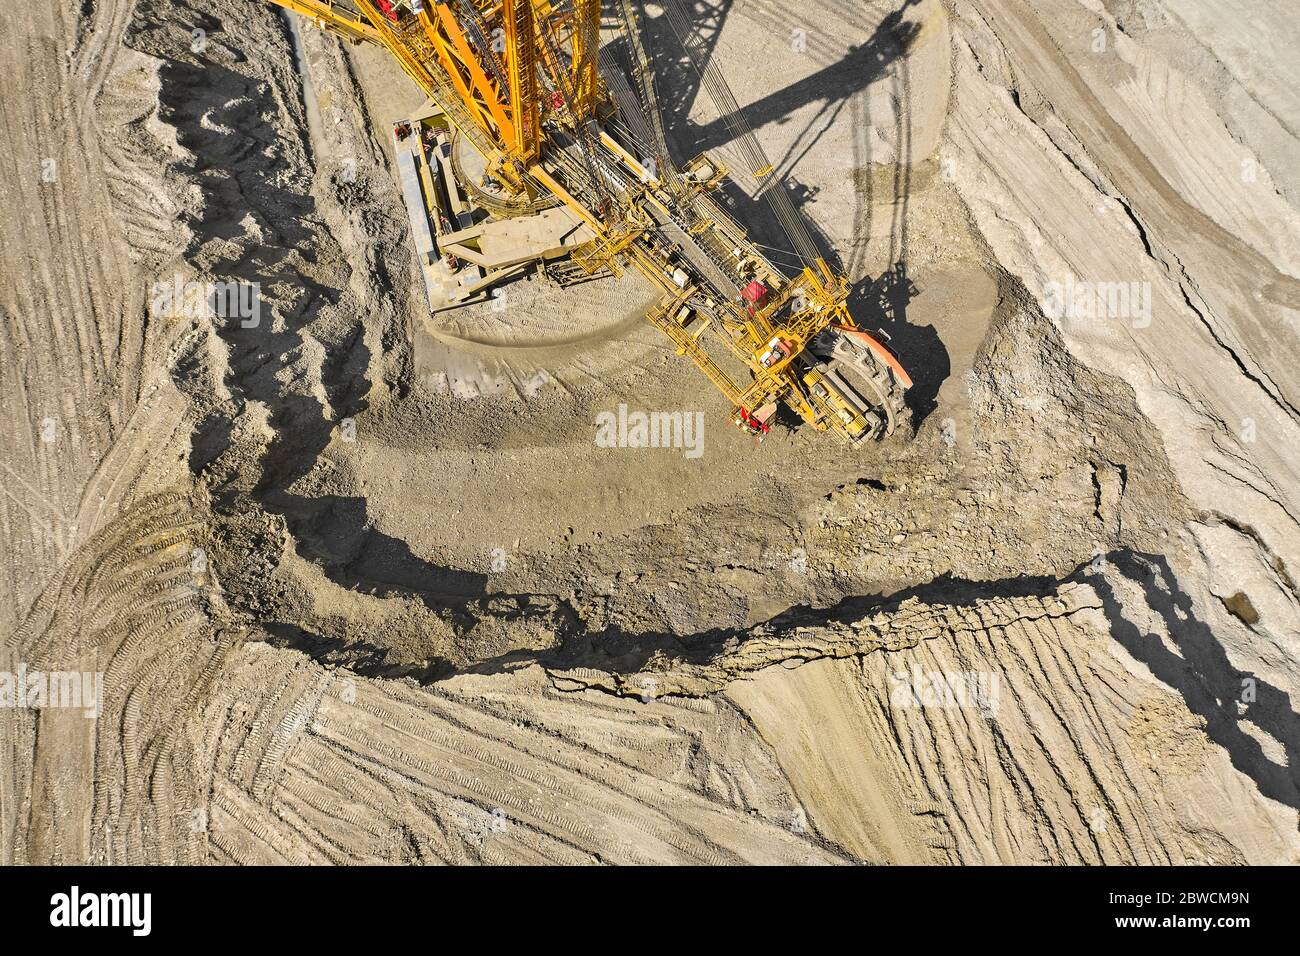 Bucket-wheel excavator for surface mining in a lignite quarry, Heavy industry.  Stock Photo